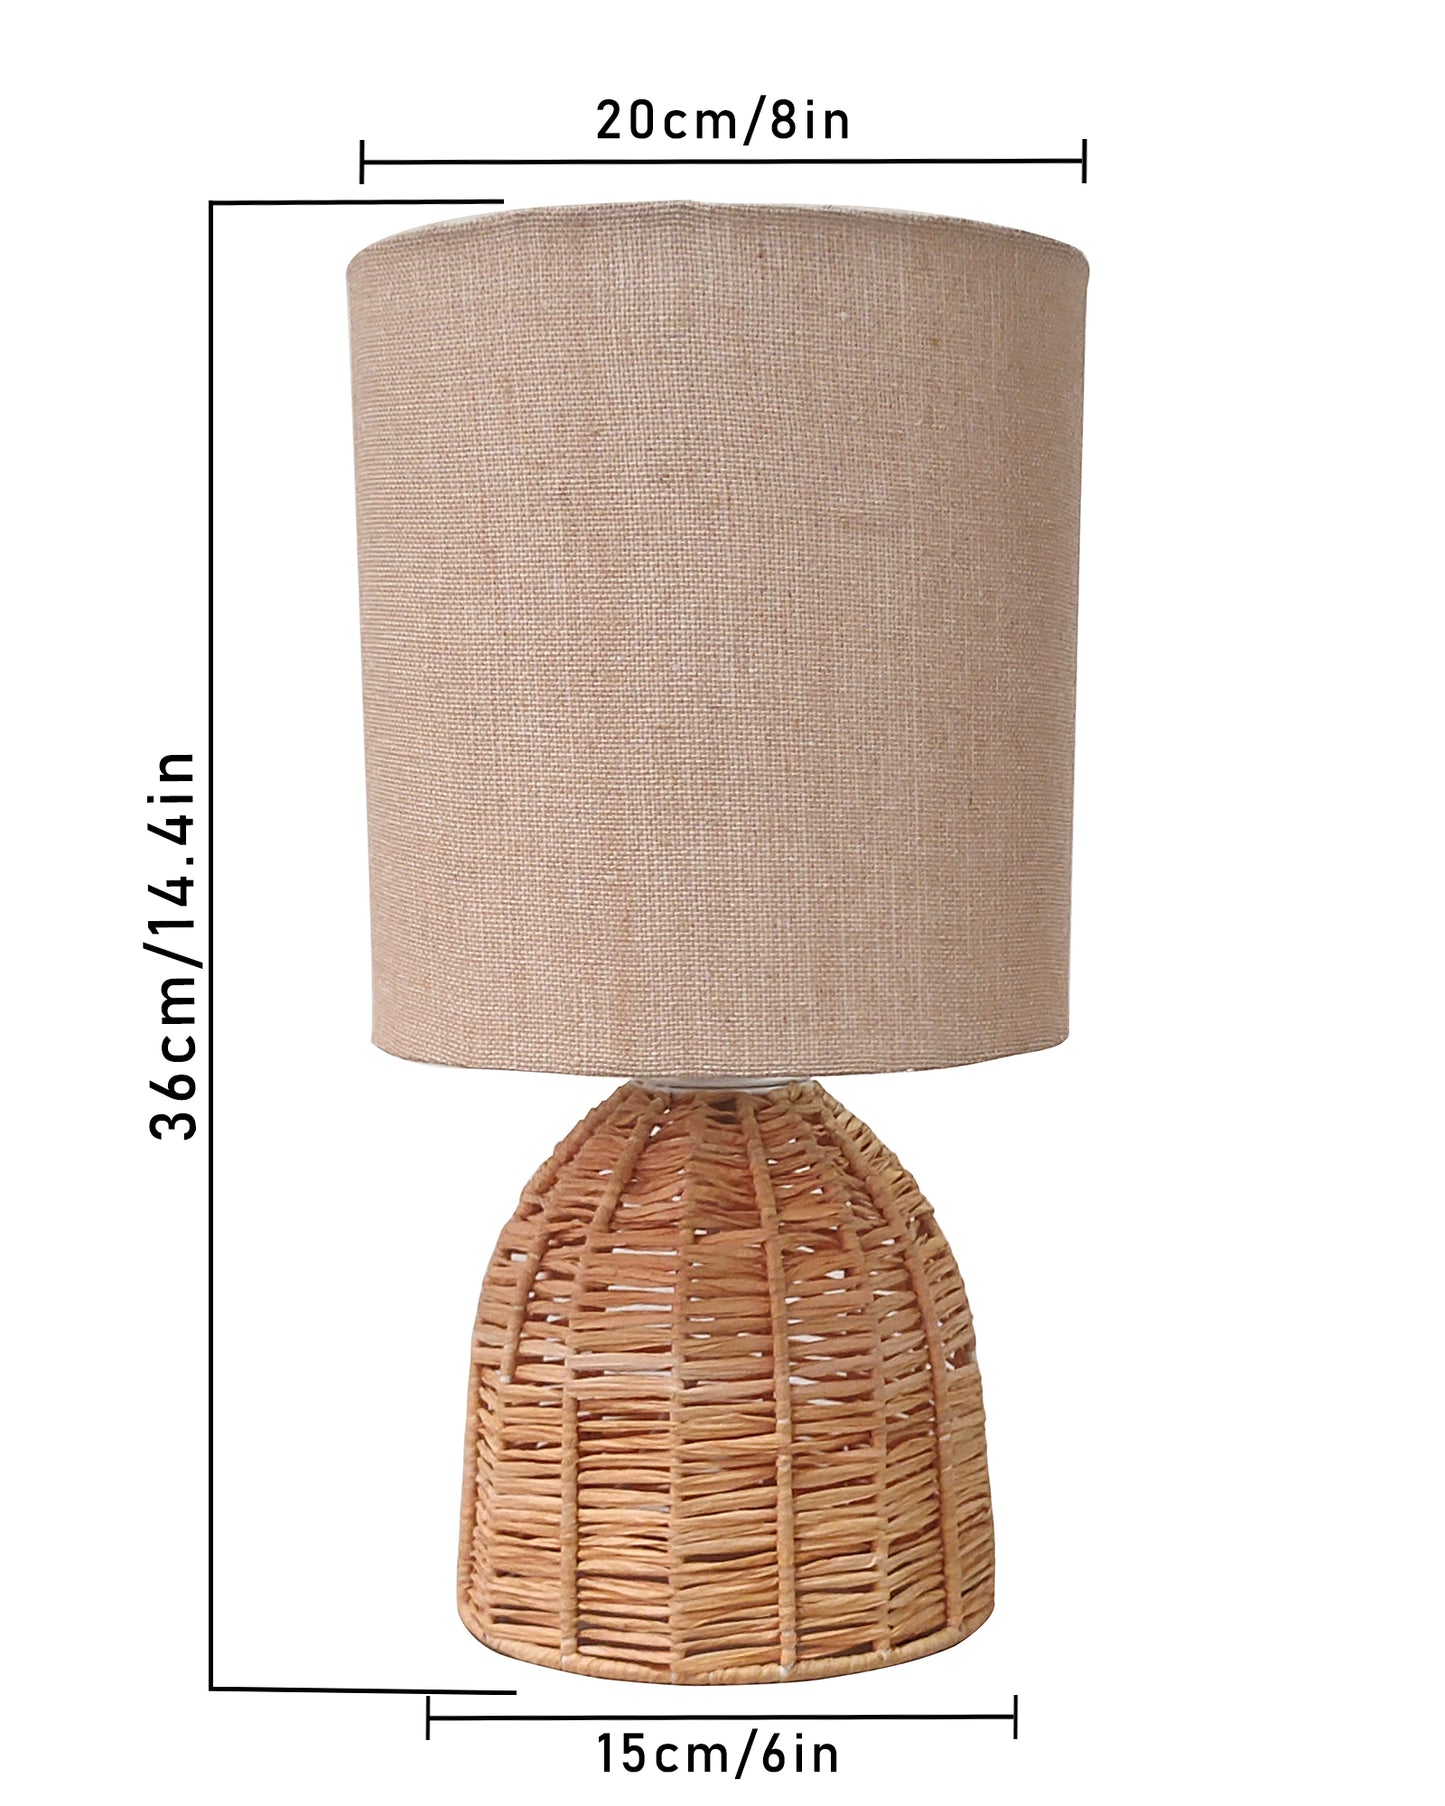 Raffia Rattan Table Lamp, Small Nightstand Lamp with Linen Fabric Lampshade, Desk Lamp Bedside Lamp for Living Room Home Office , Oval